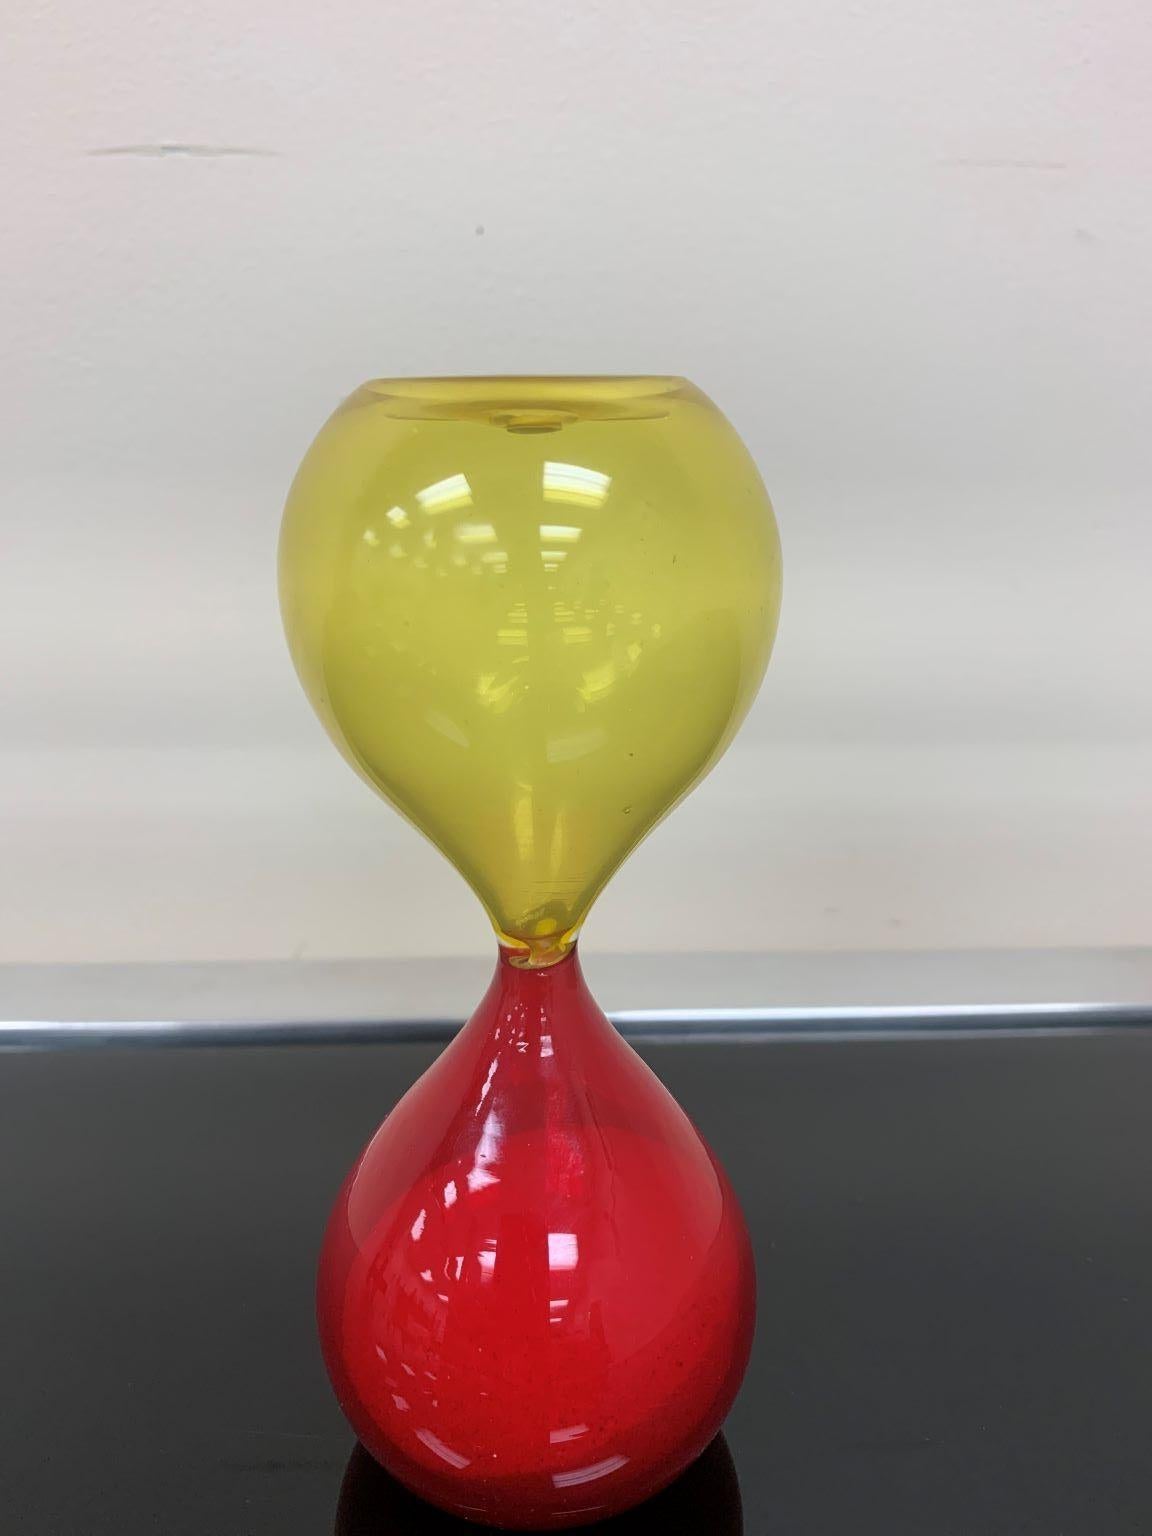 Beautiful vintage Glass (“Clessidre” Italian) hourglass timer in red and yellow, designed by Paolo Venini. Excellent original condition. Model 4905 and shown in the catalogue, 